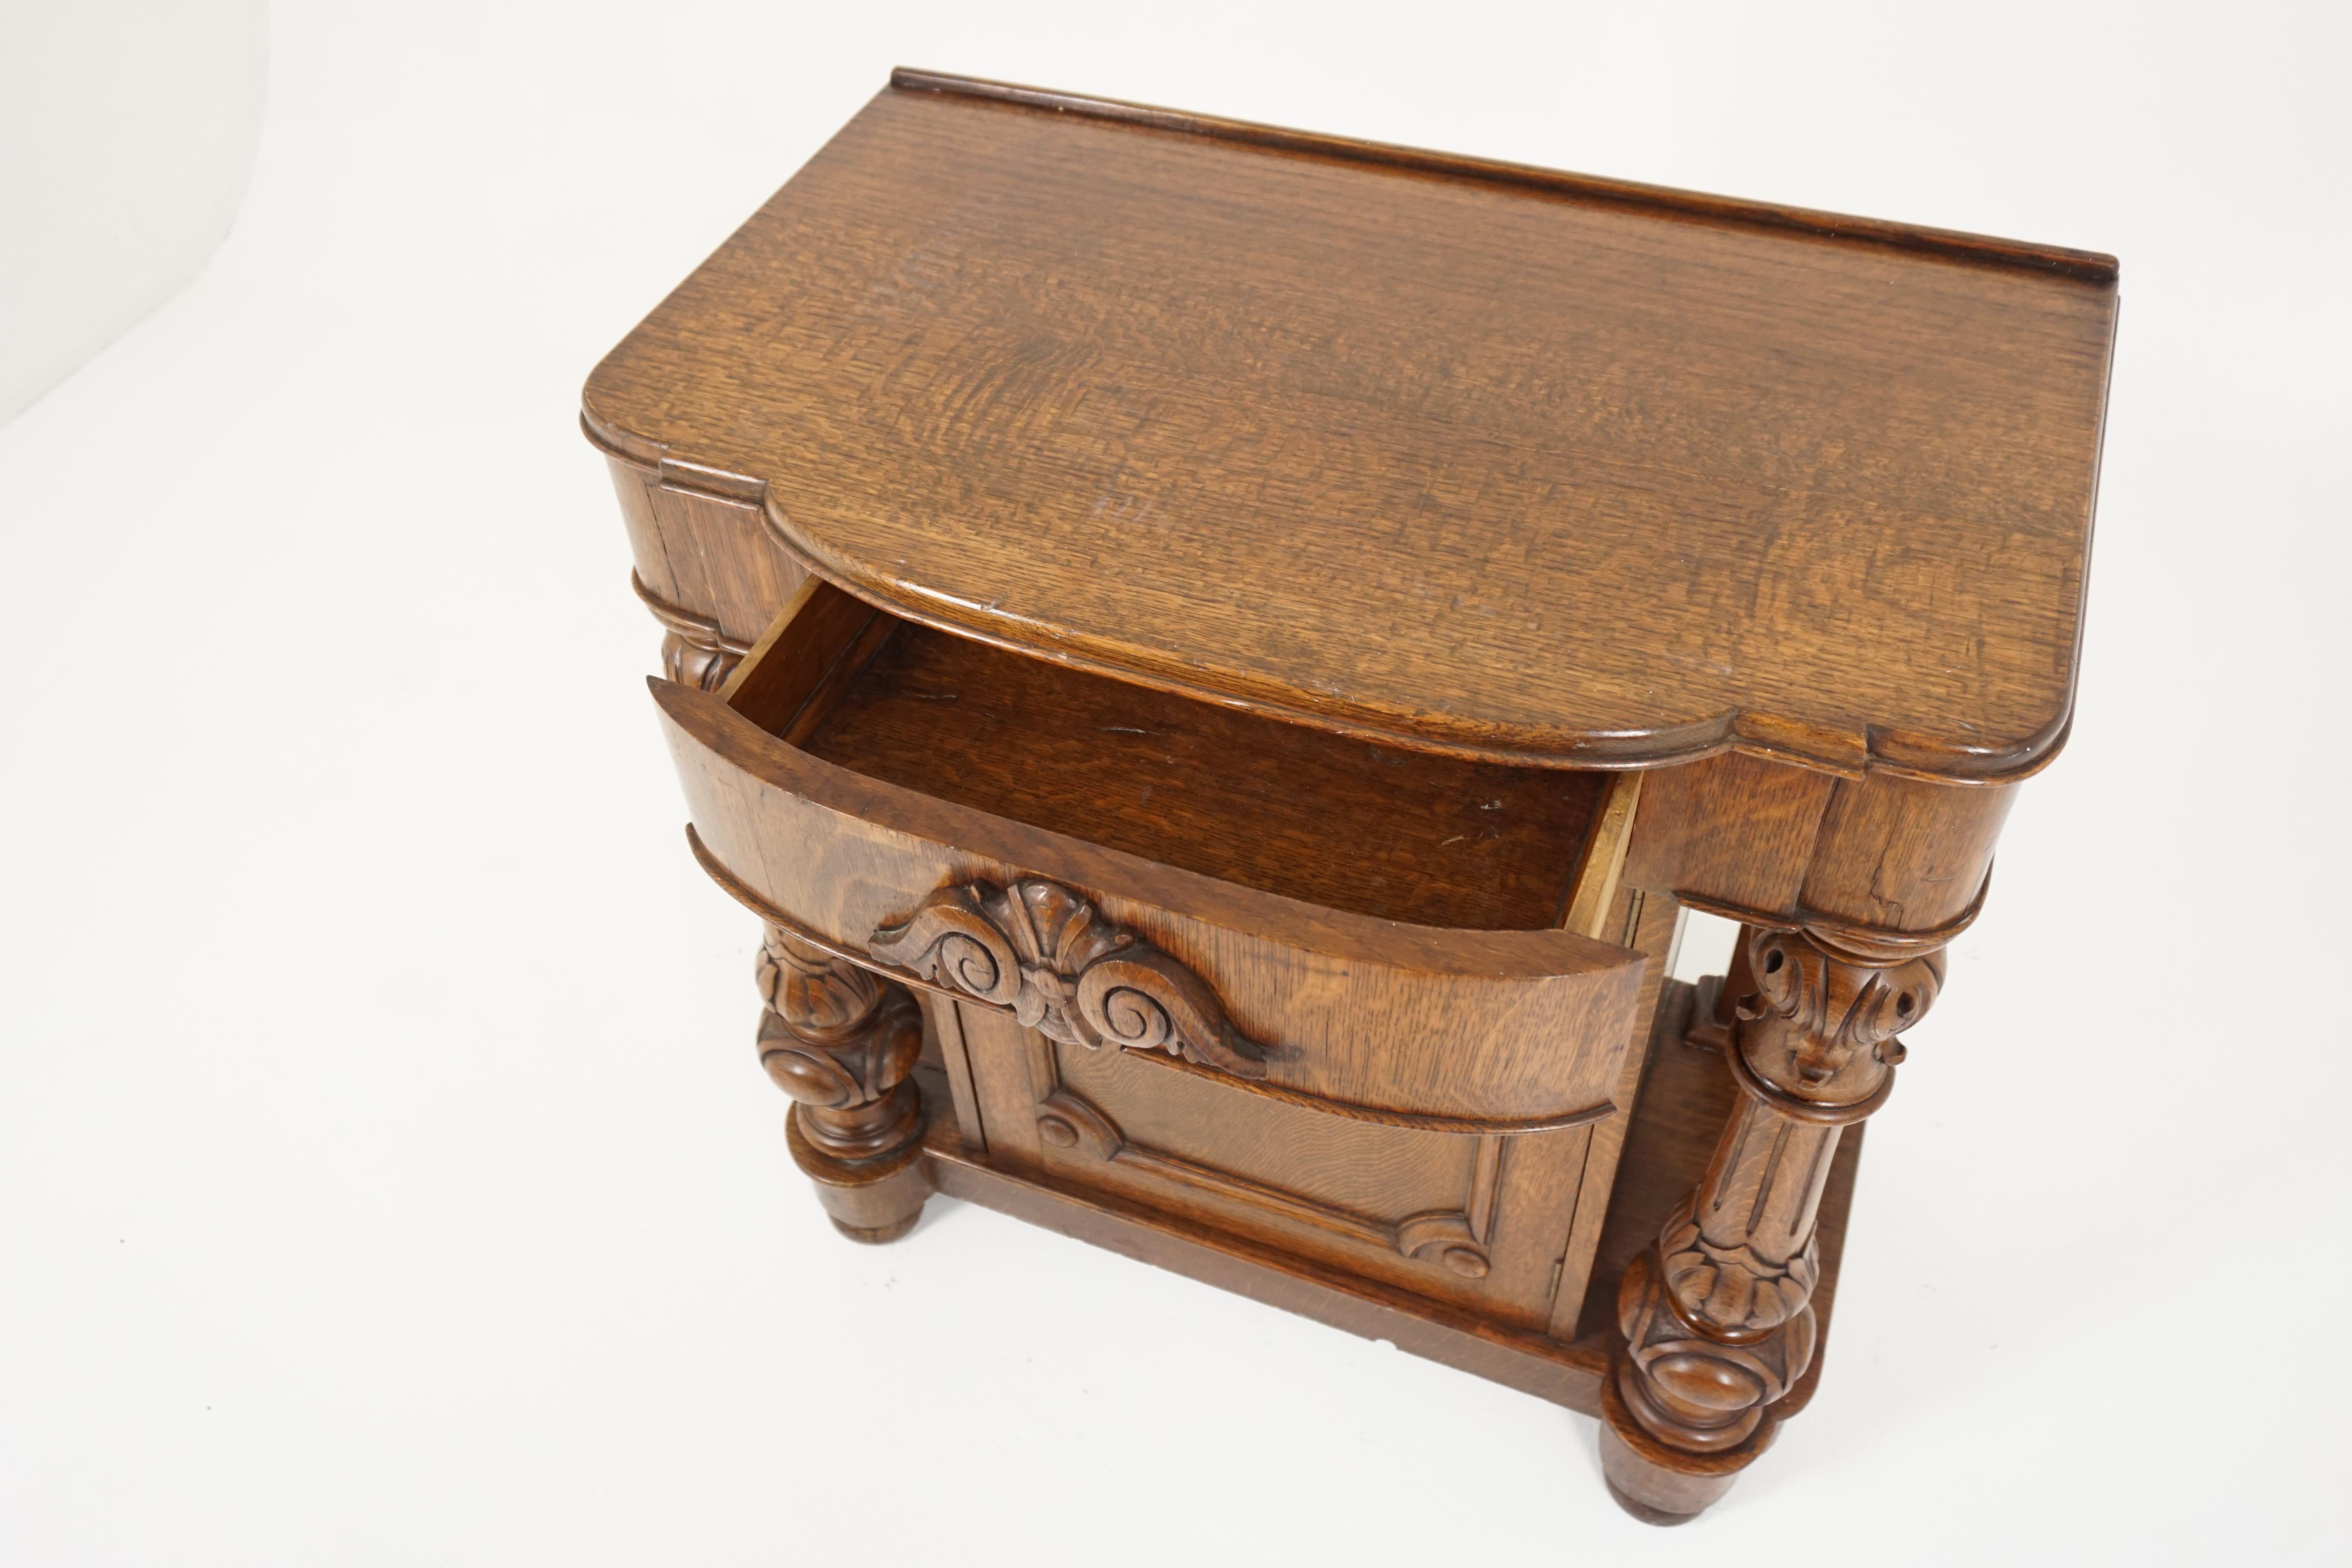 Antique hall table, Victorian carved tiger oak end table or lamp table, Antique Furniture, Scotland 1920, B2032

Scotland 1920
Solid oak and veneer
Original finish
Shaped tiger oak top
Single bow front drawer below
Pair of heavily carved